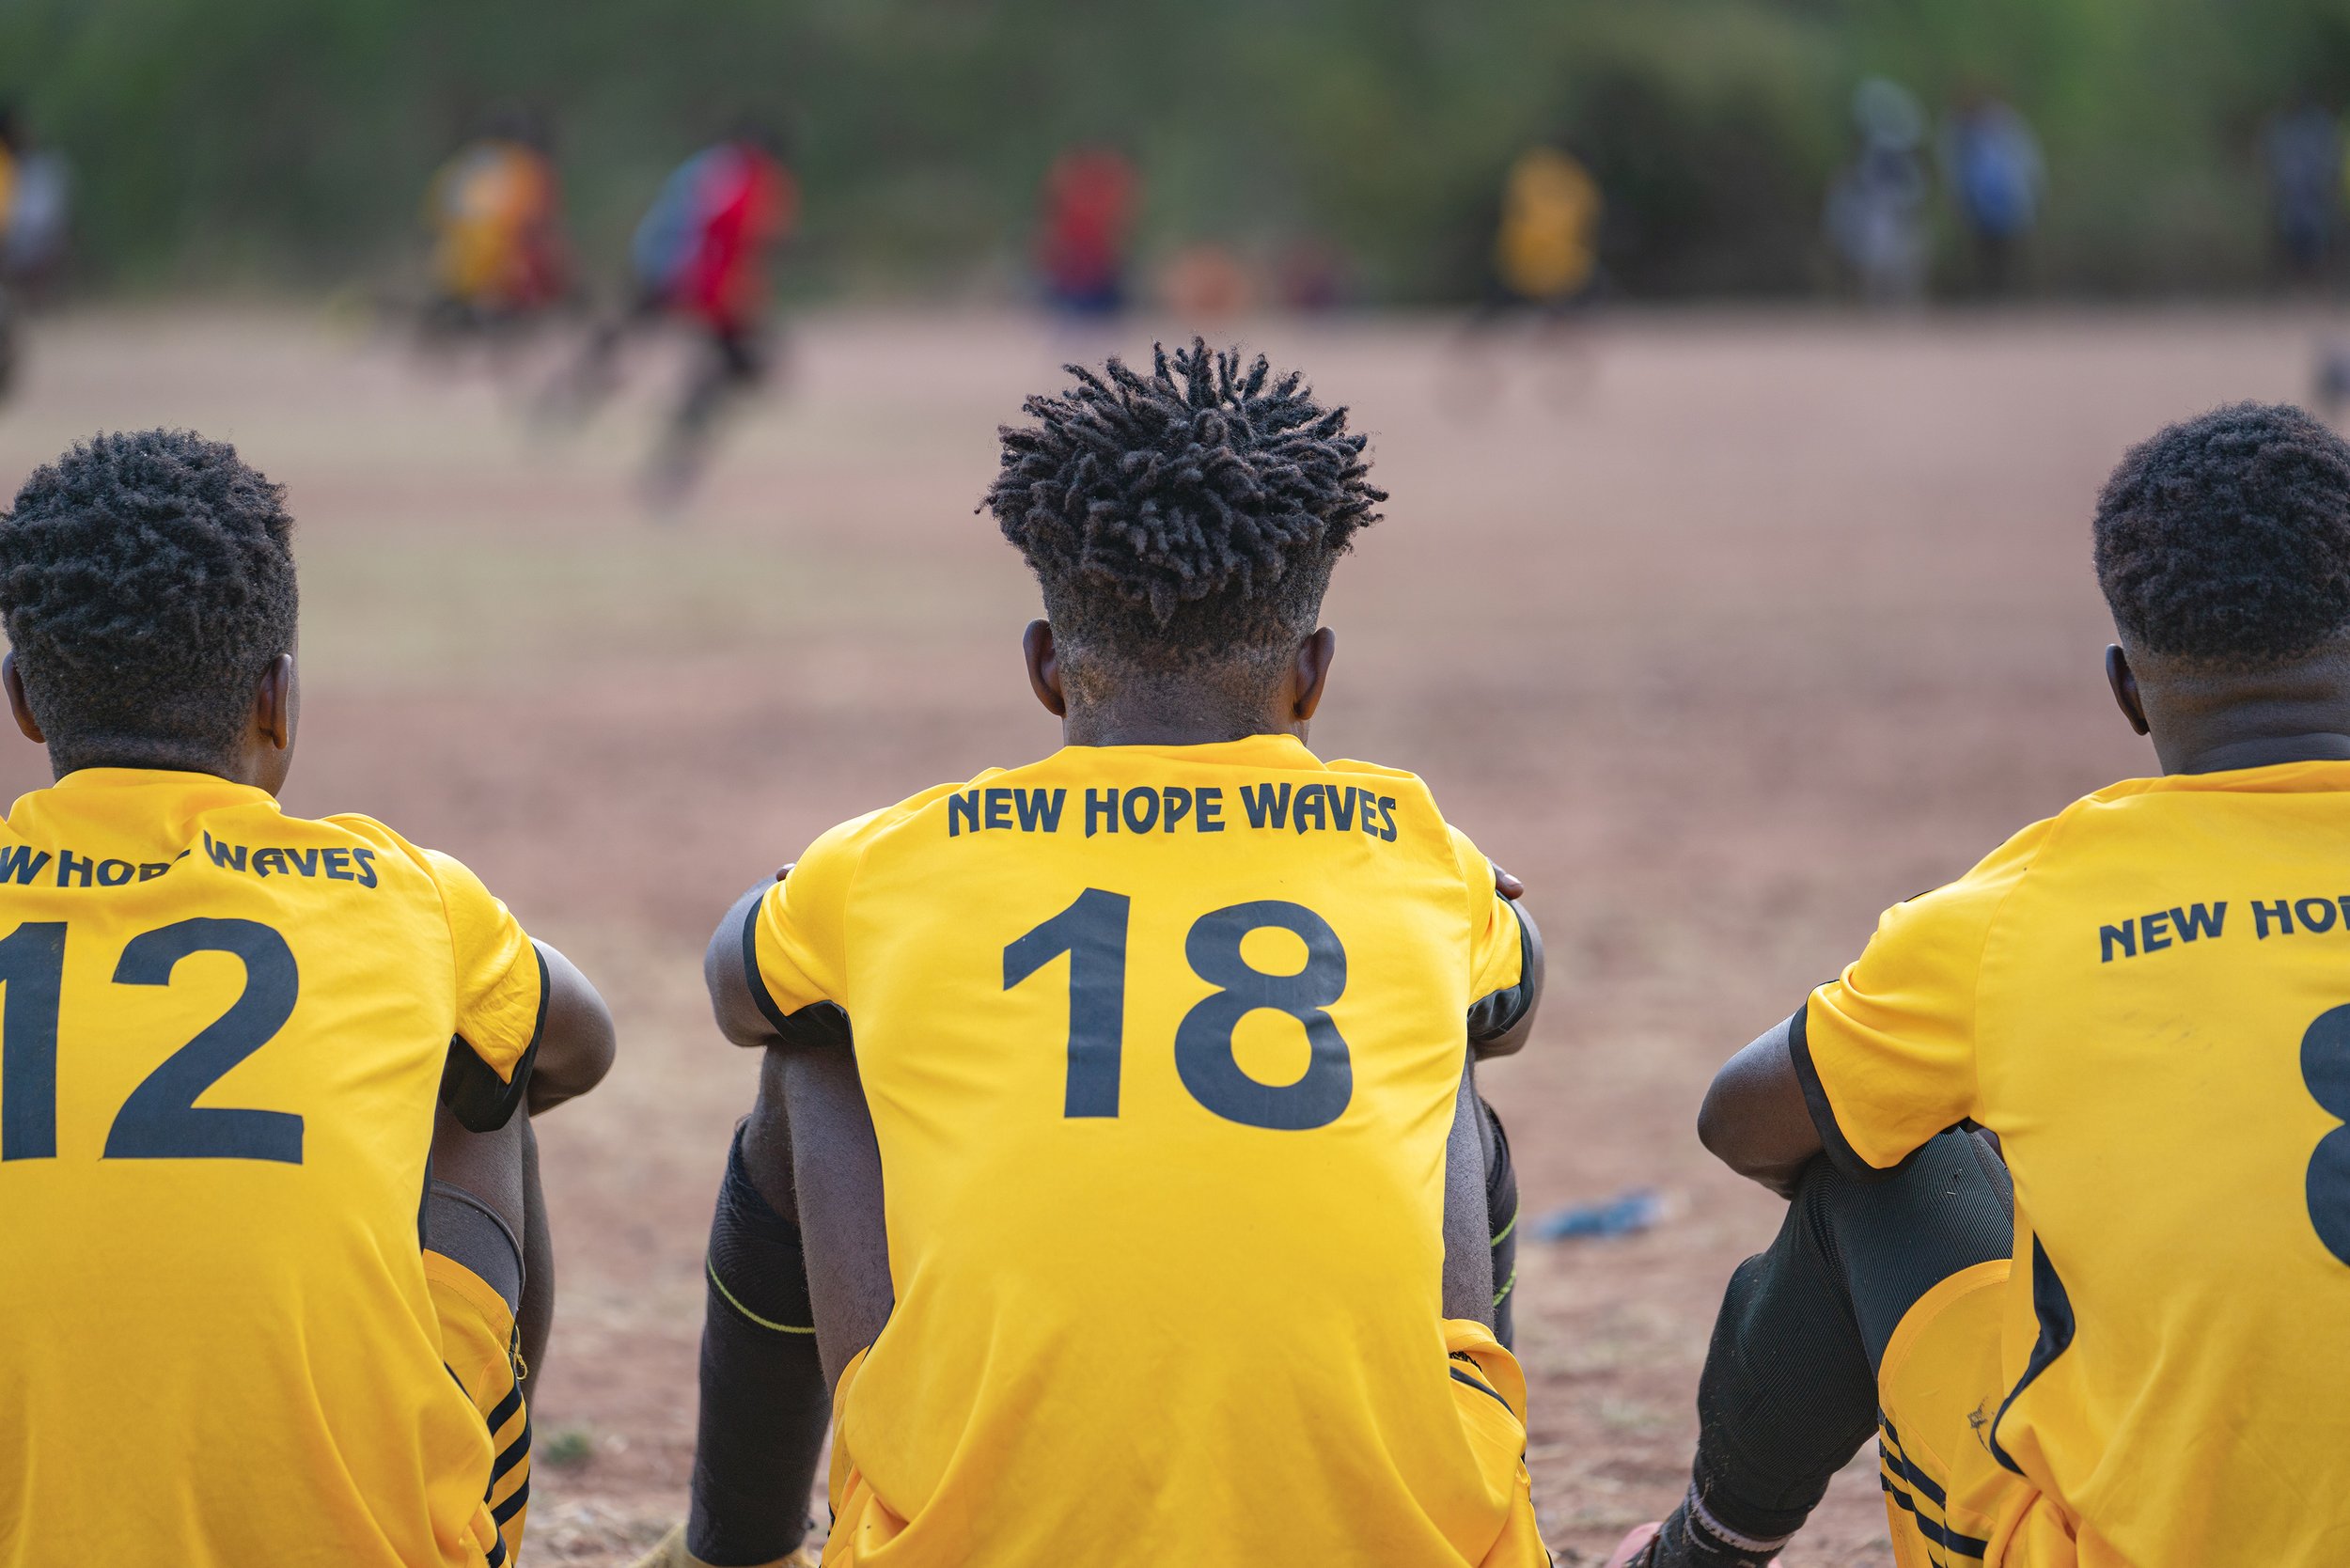  New Hope Waves Football team players waiting on the sidelines watching the community game  in Livingstone Zambia.  